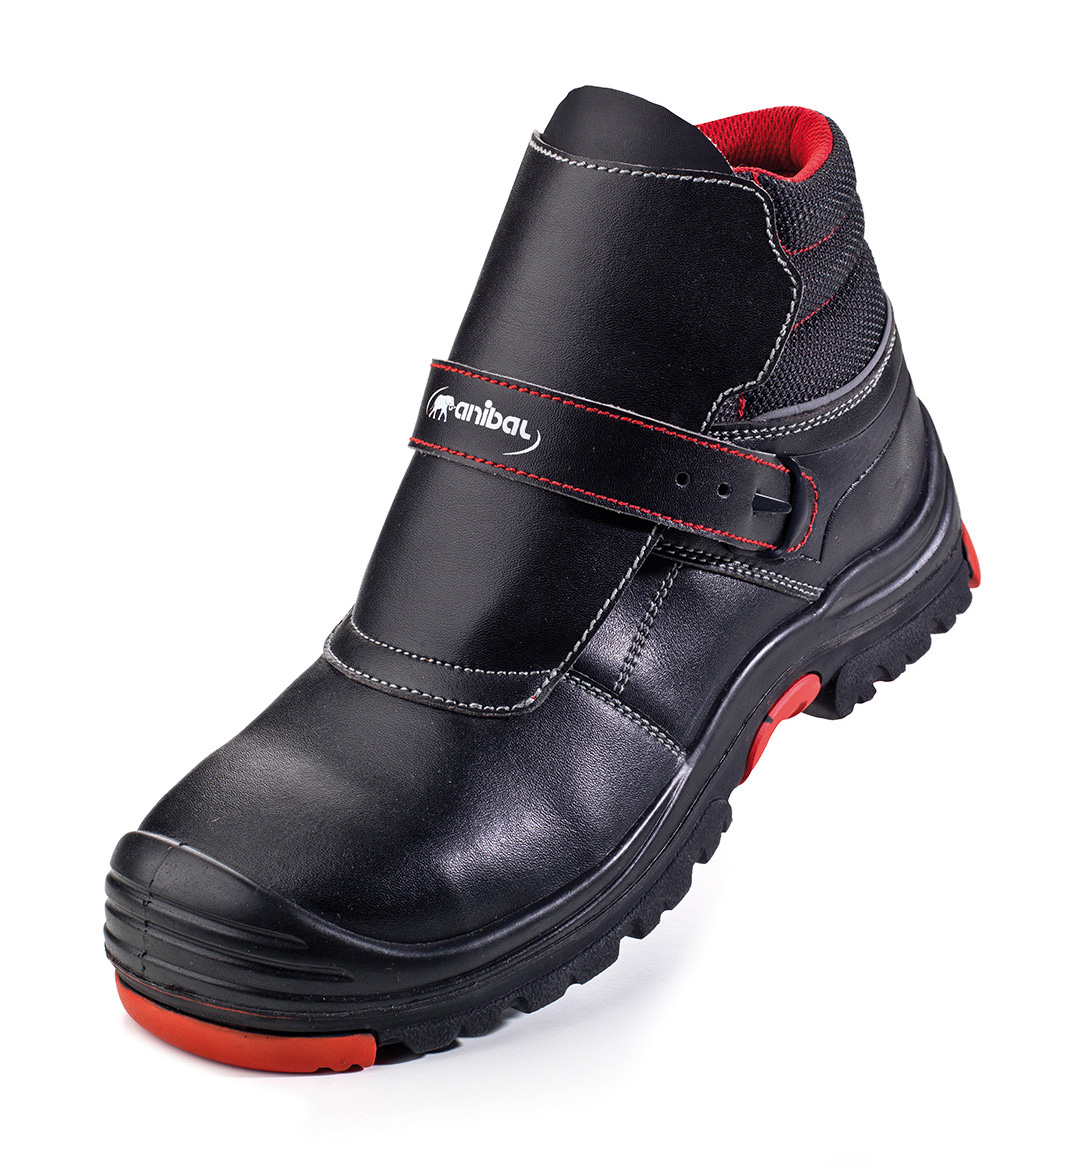 1688-BSOGNR Safety Footwear PU/Nitrilo Bota mod. “TERMOPILAS”.
Microfiber welder boot in S3 with double density sole Polyurethane / Rubber Nitrile.